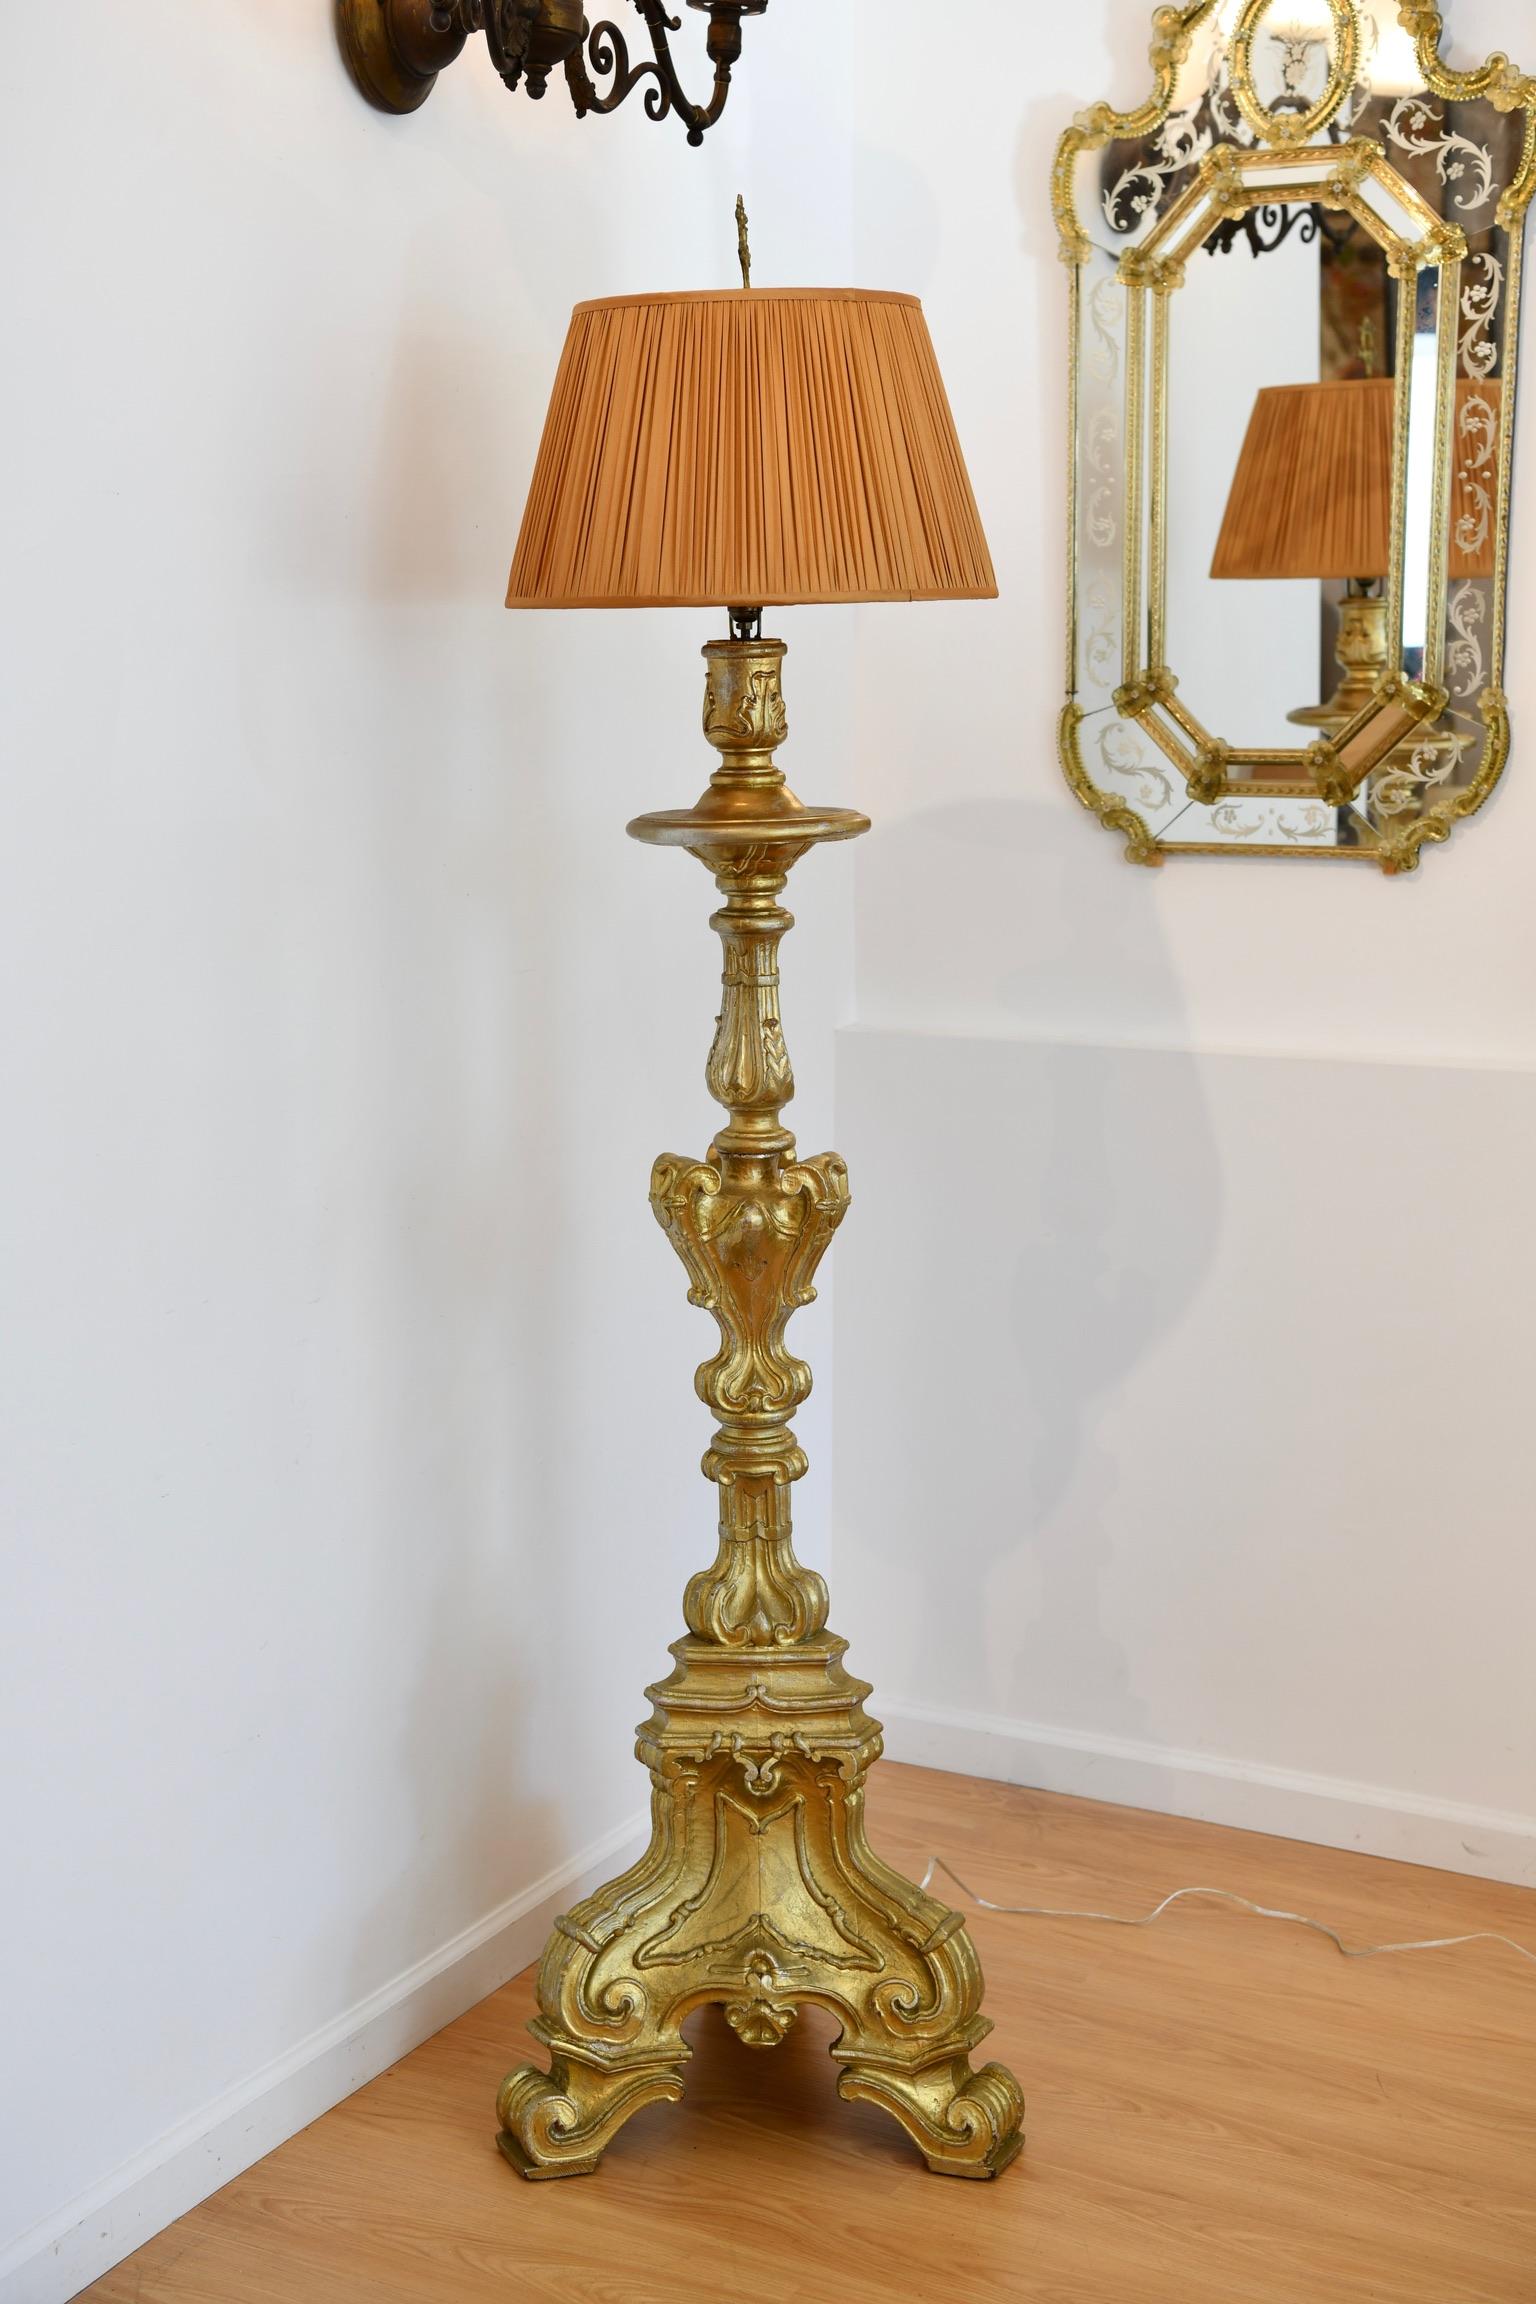 Italian Baroque-Style Carved Giltwood Floor Lamp In Good Condition For Sale In Brooklyn, NY